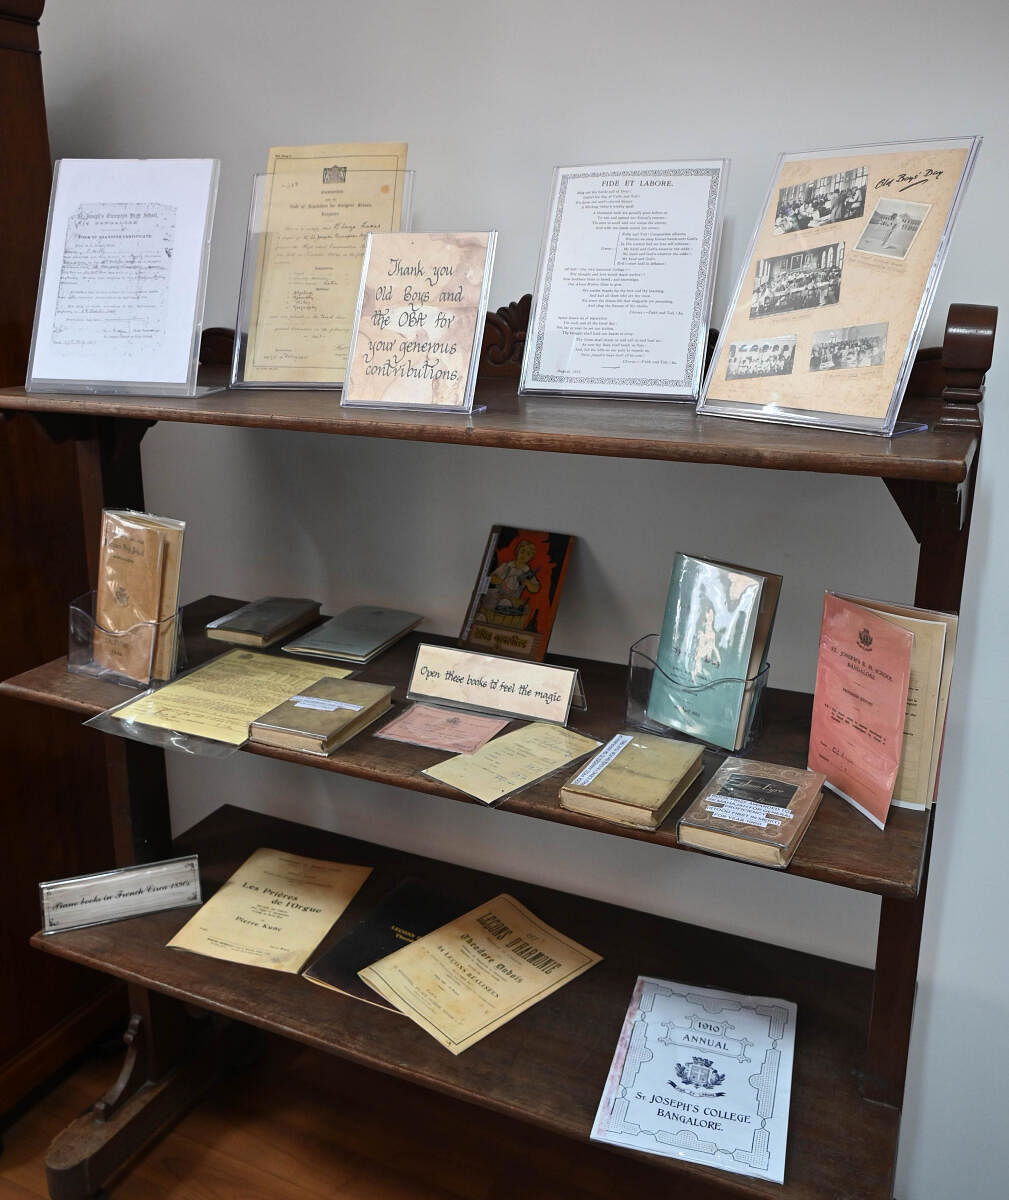 The SJBHS Old Boys' Association has contributed textbooks, school diaries and magazines to the museum. 